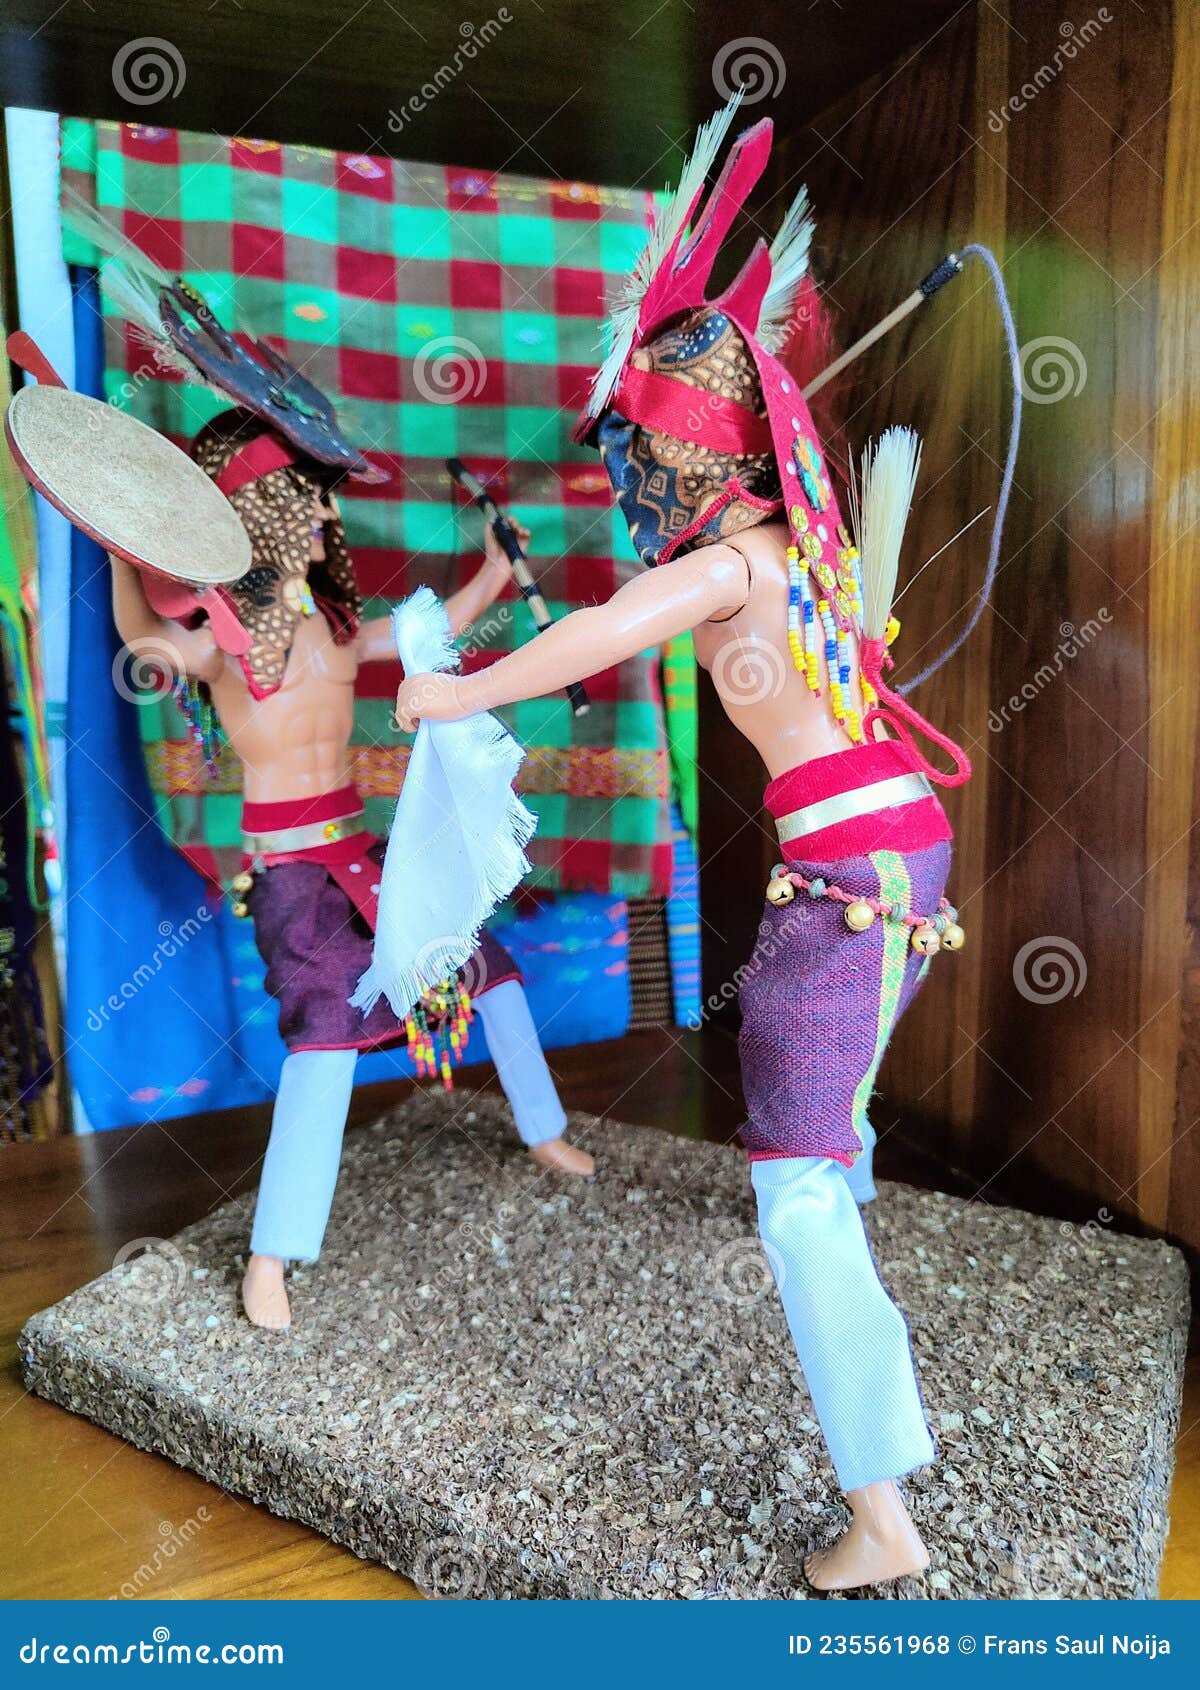 a miniature of the caci dance which is a traditional war dance of east manggarai tribe displayed on shop in airport for sold